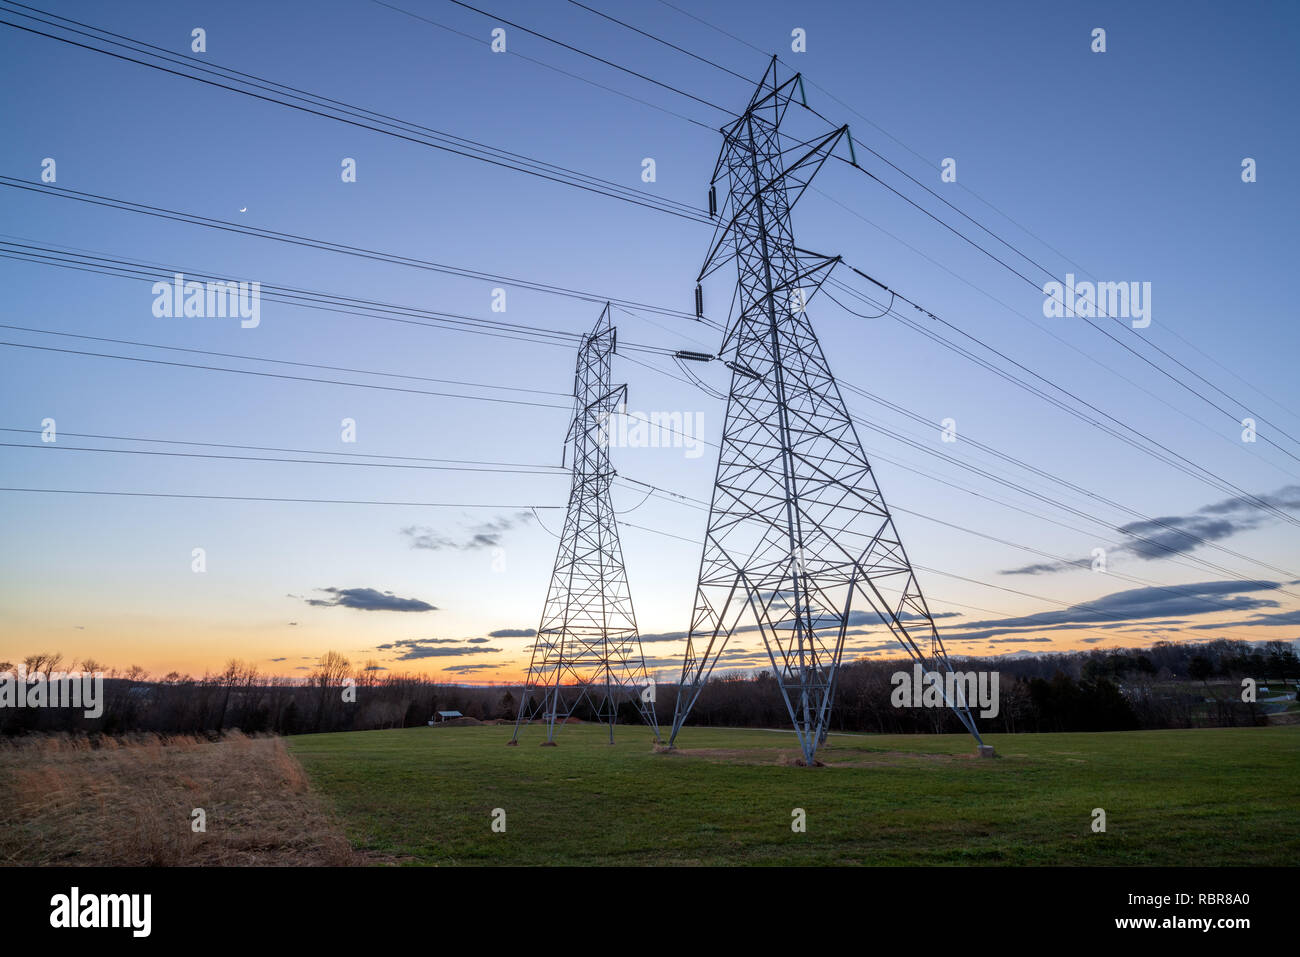 Electricity Distribution Towers and Wires at Dusk Stock Photo